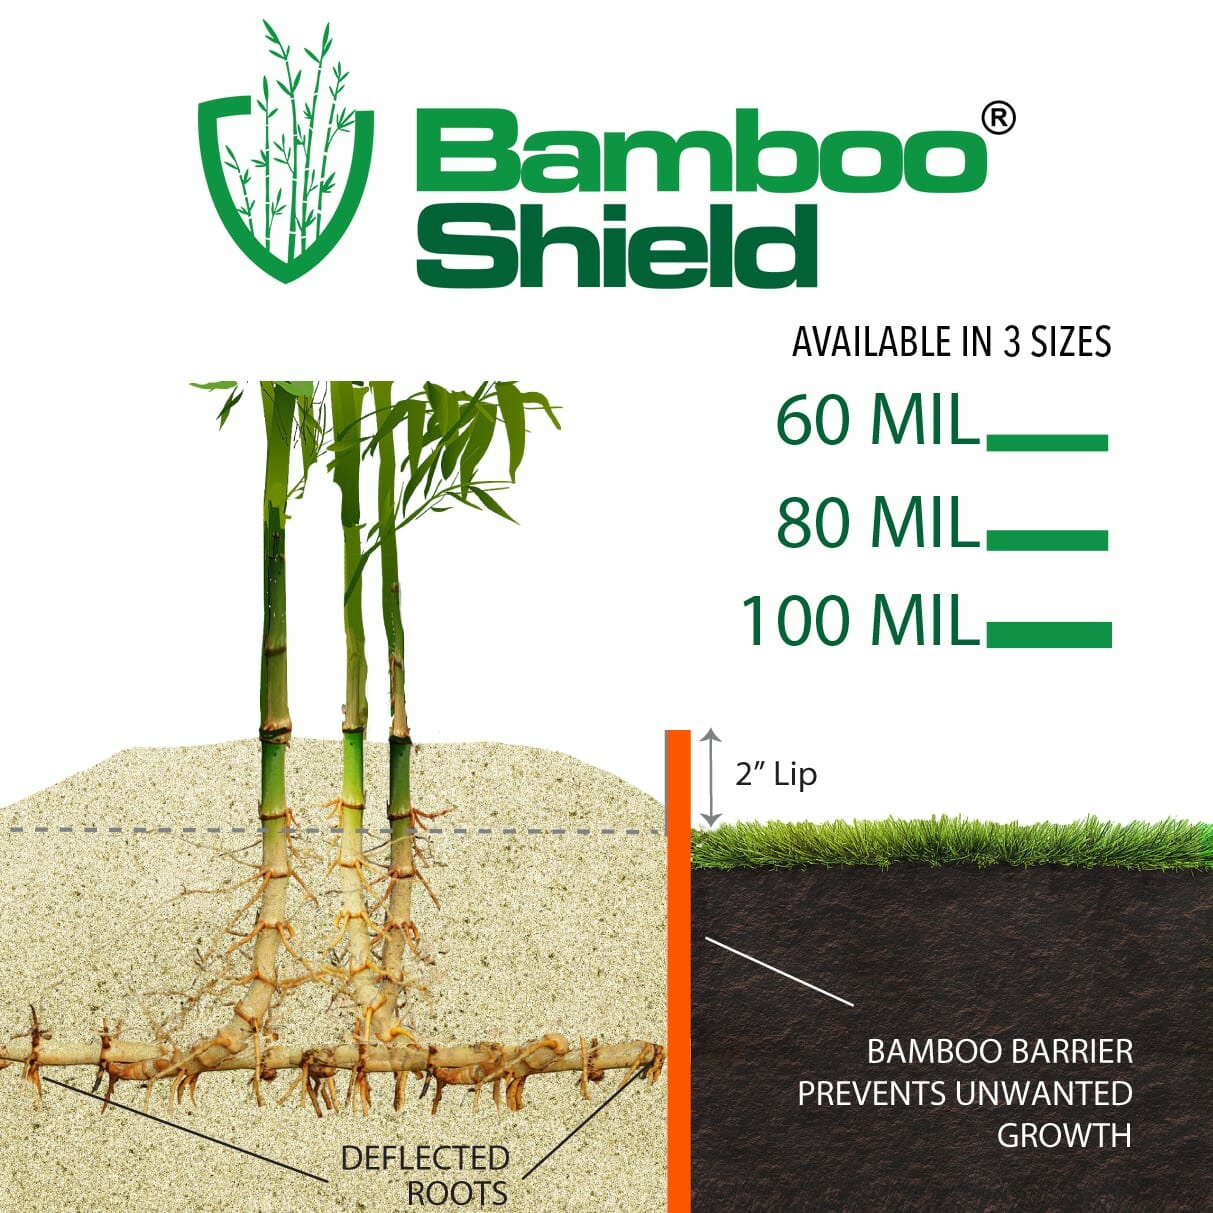 Bamboo Forever  Central Florida bamboo nursery specializing in  non-invasive clumping bamboo